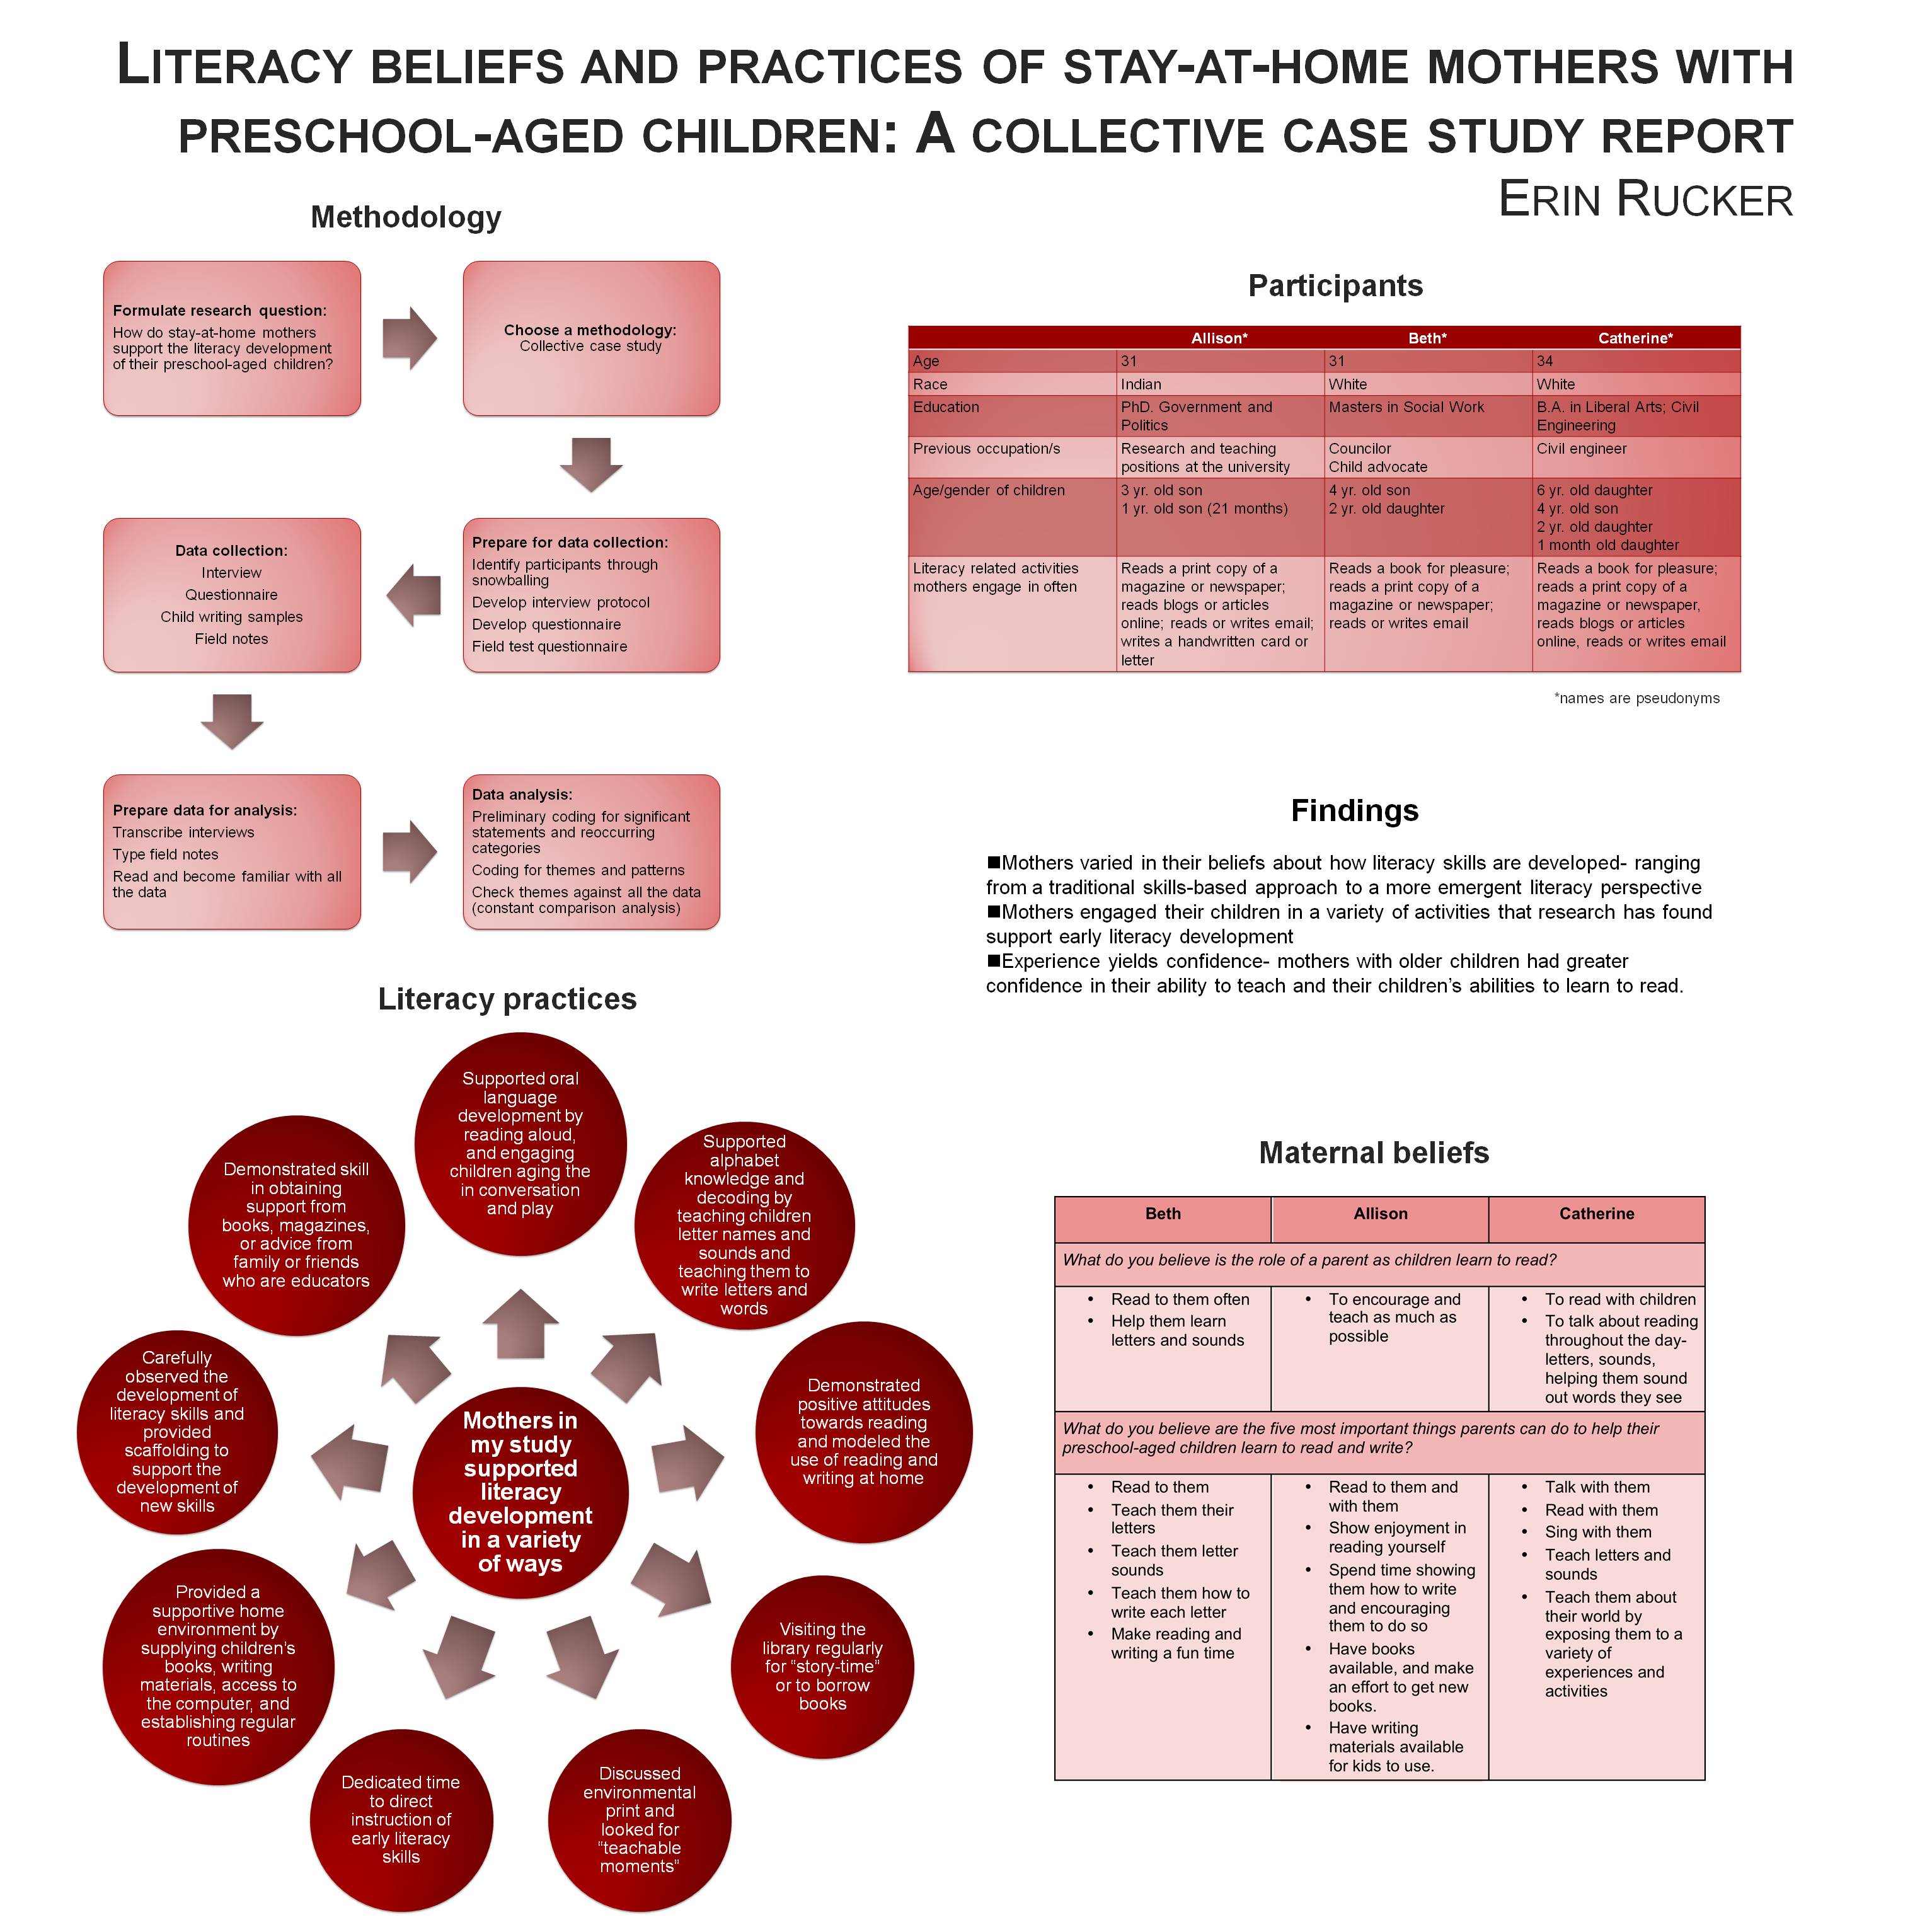 Poster image: Literacy Beliefs and Practices of Stay-at-home Mothers with Preschool-aged Children:  A Collective Case Study Report